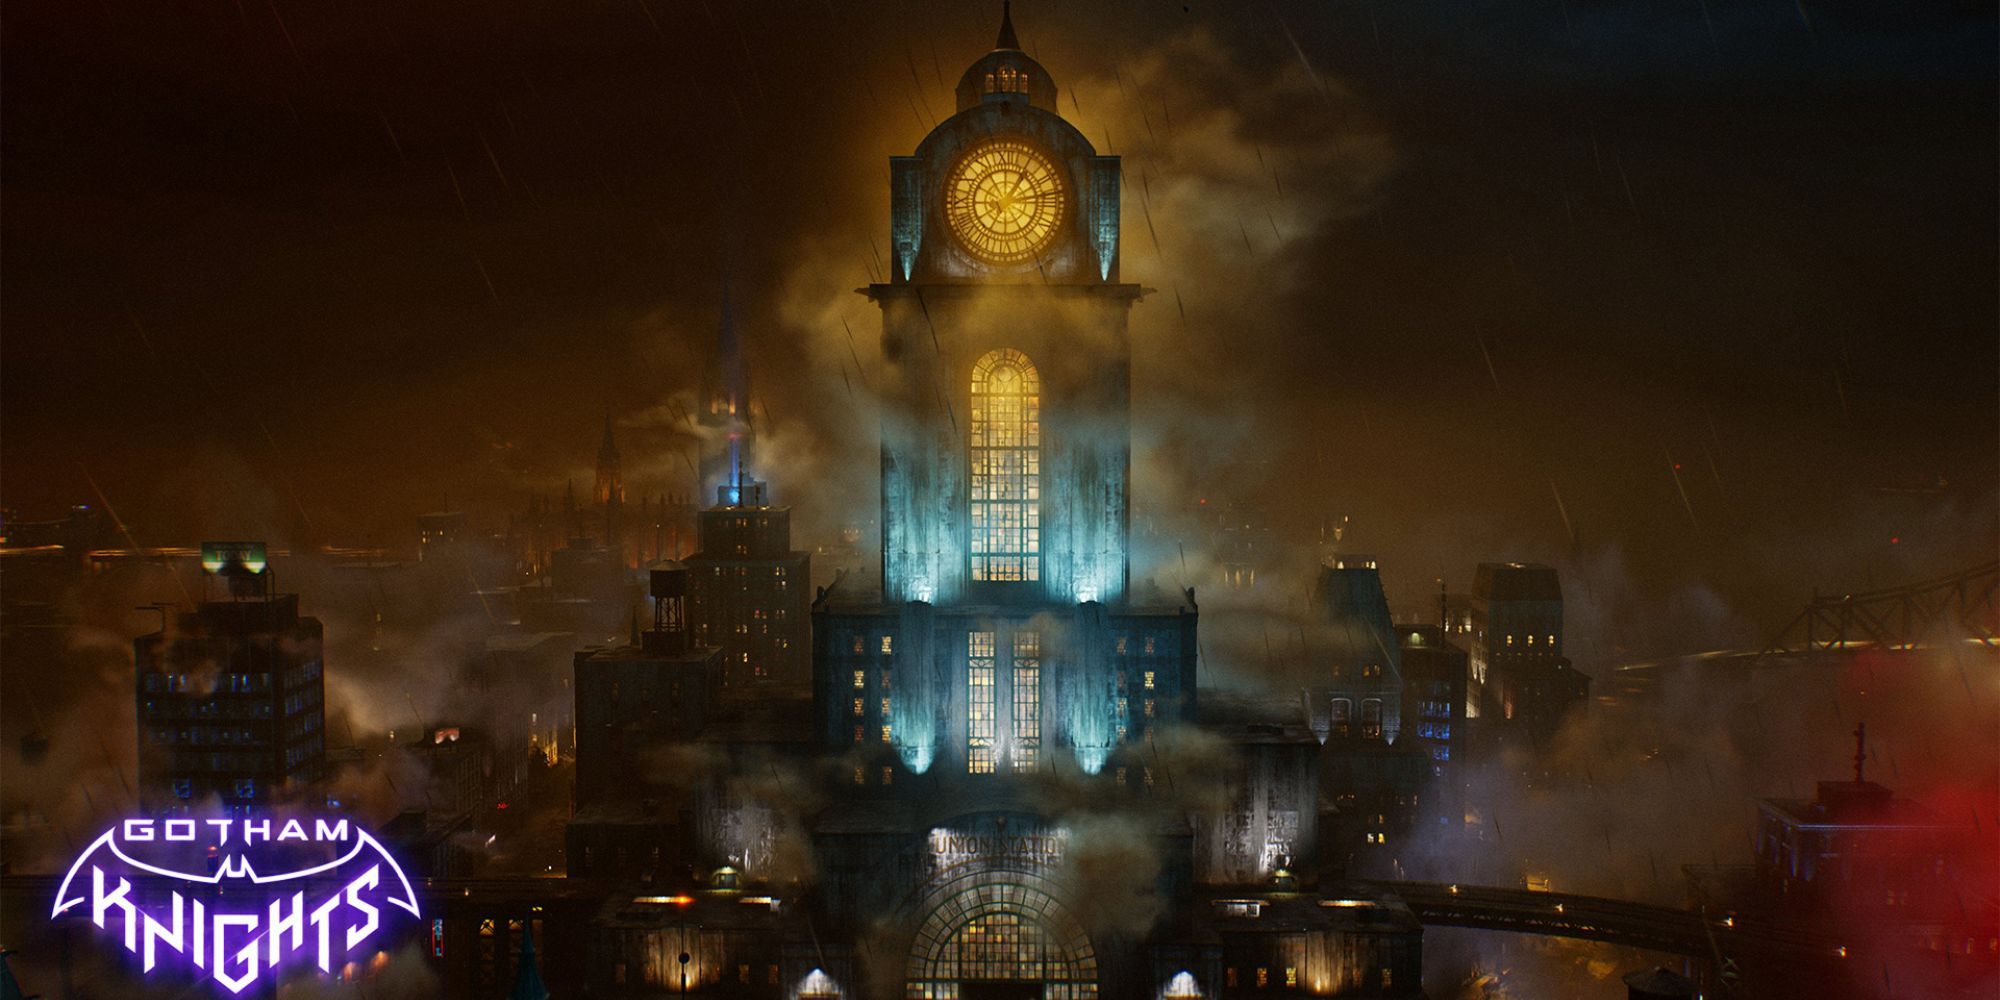 image from the game Gotham Knights showing the new Bat-Family HQ in a clocktower called The Belfry 